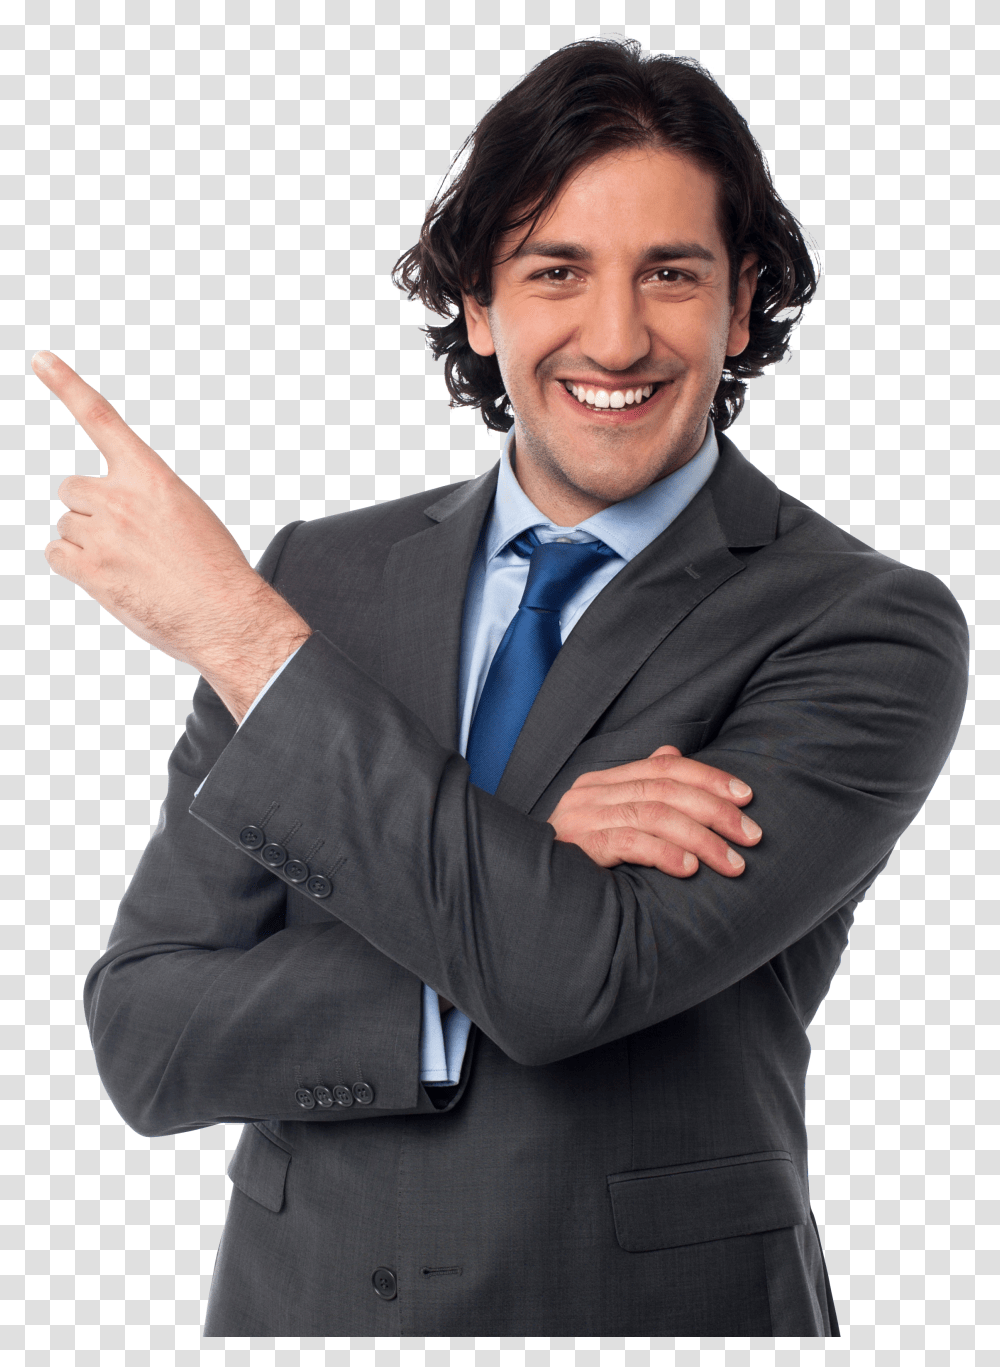 Man In Suit Pointing Transparent Png